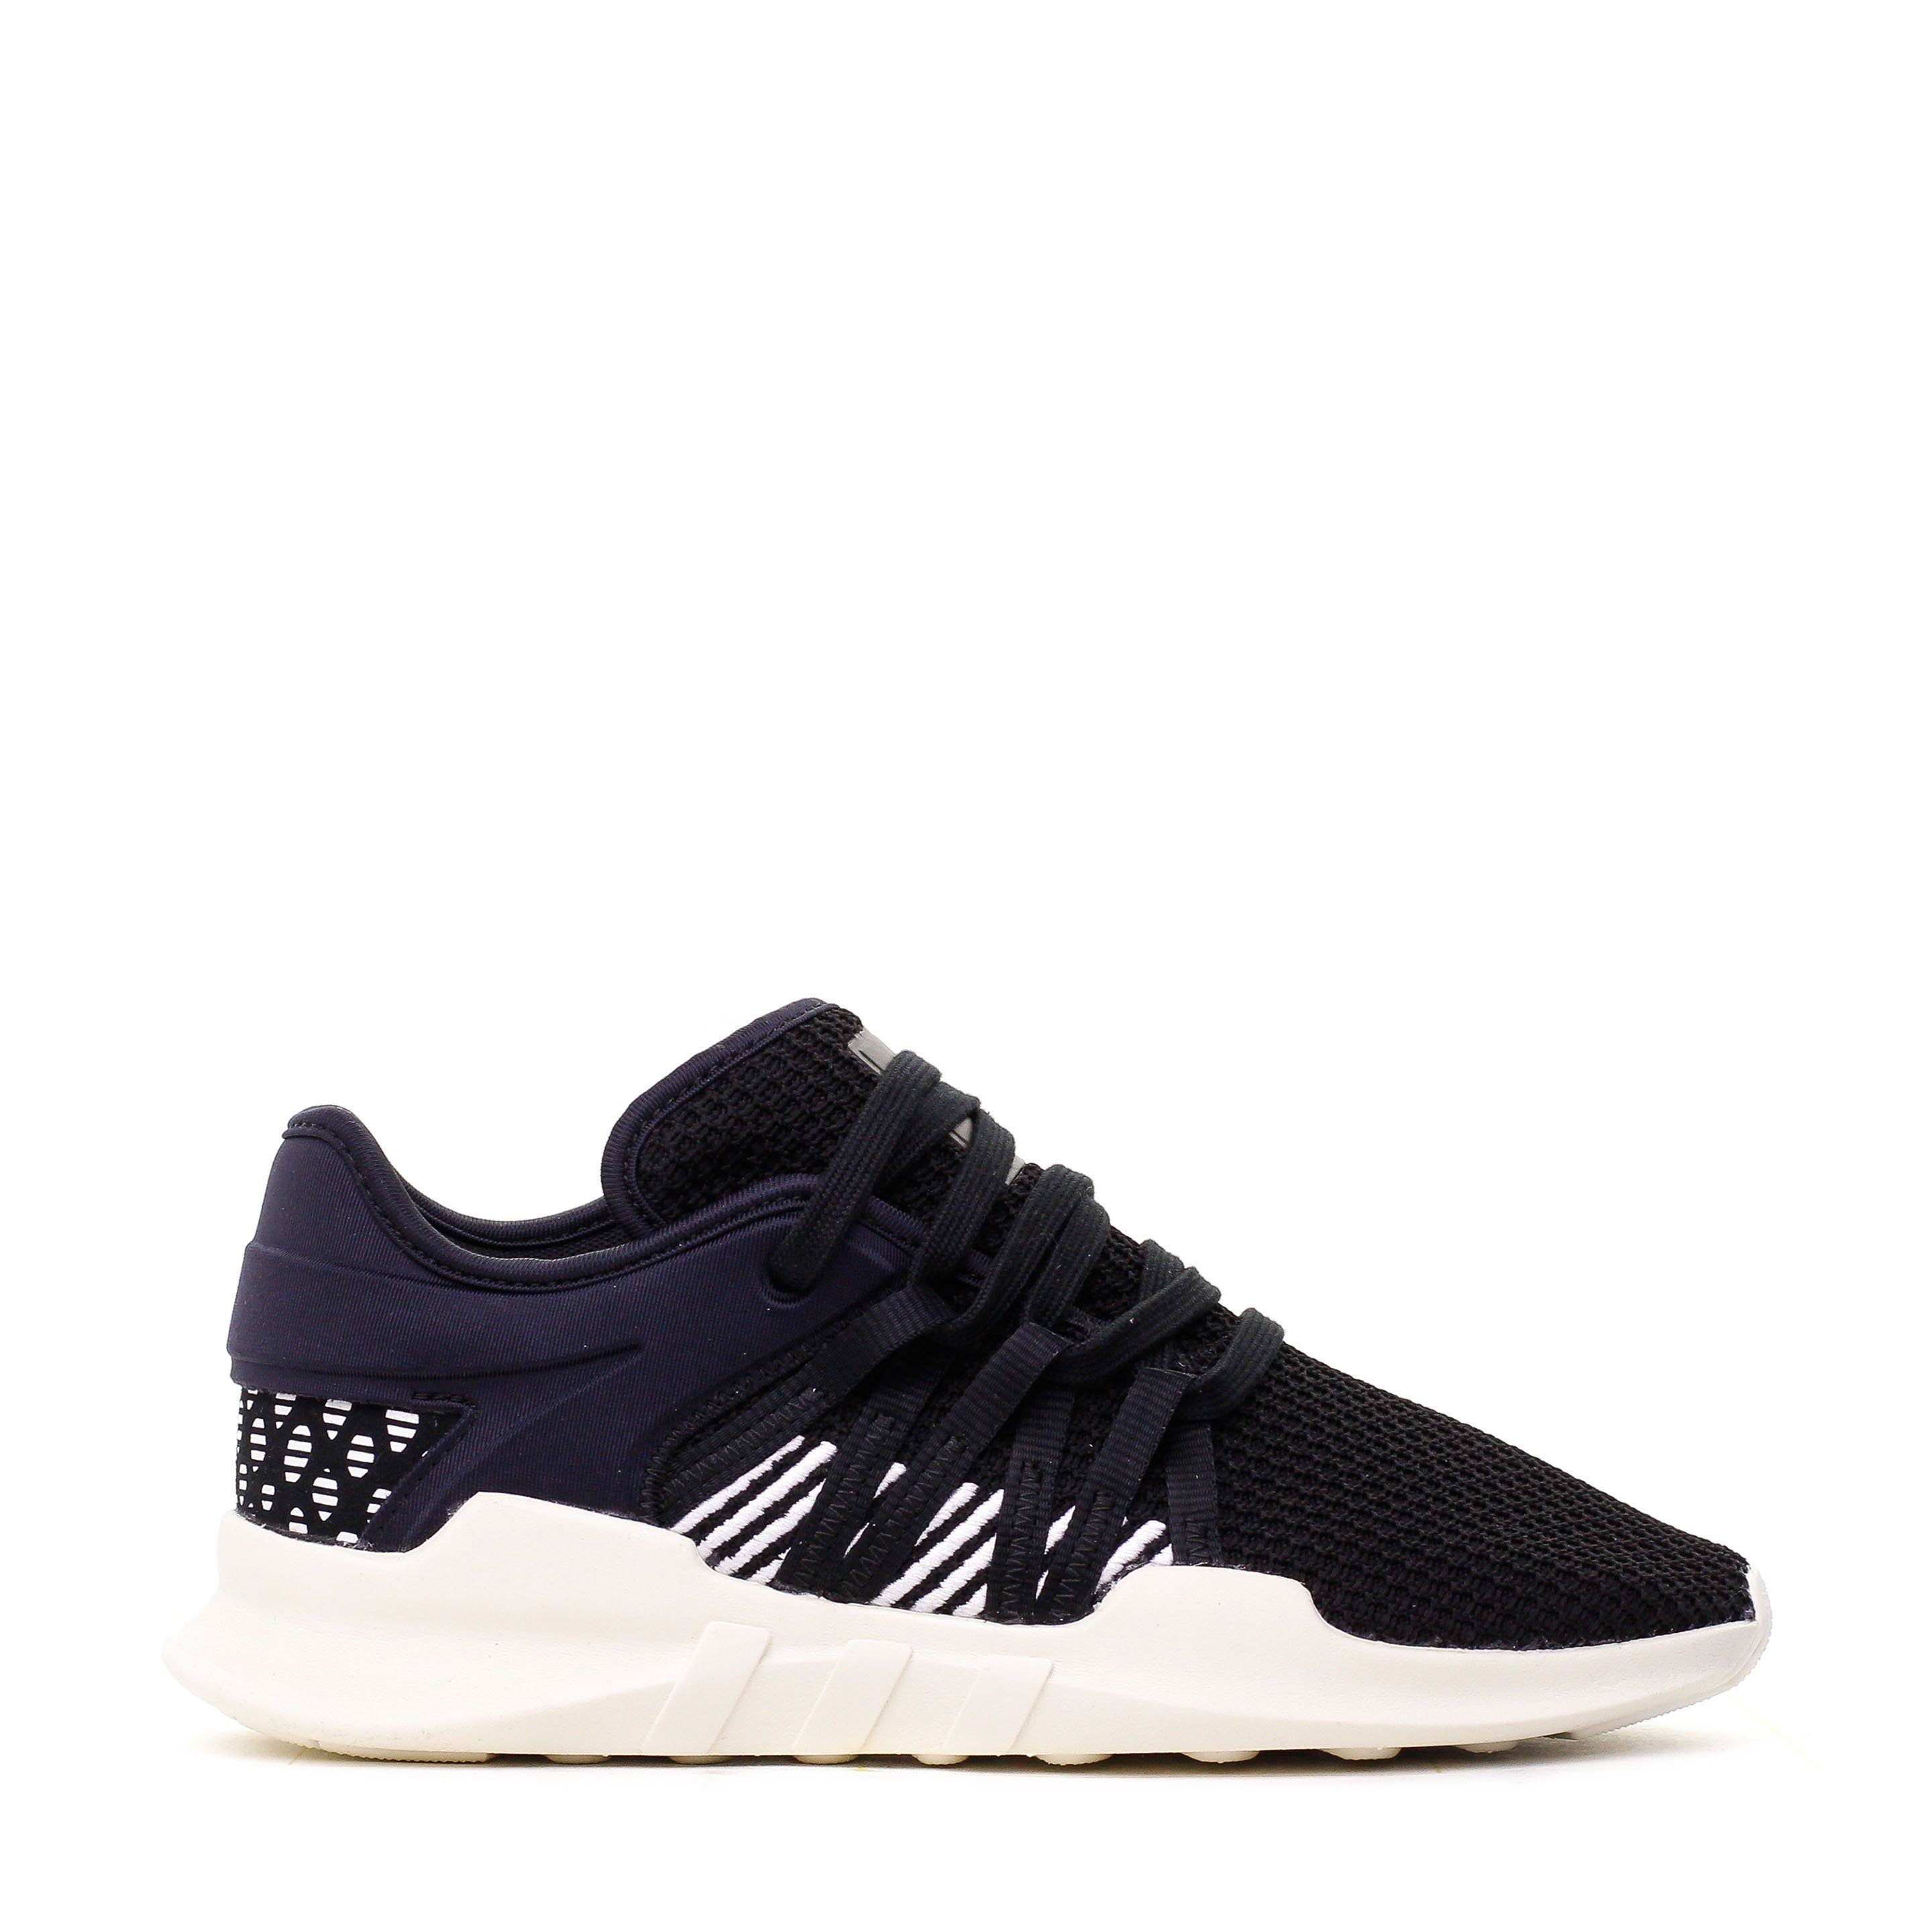 bombe Indlejre Mig selv Adidas Originals Women EQT Racing Adv W Black White BY9798 (Fast shipping)  - HotelomegaShops - euro adidas terrex skychaser gtx canada shoes sweatpants